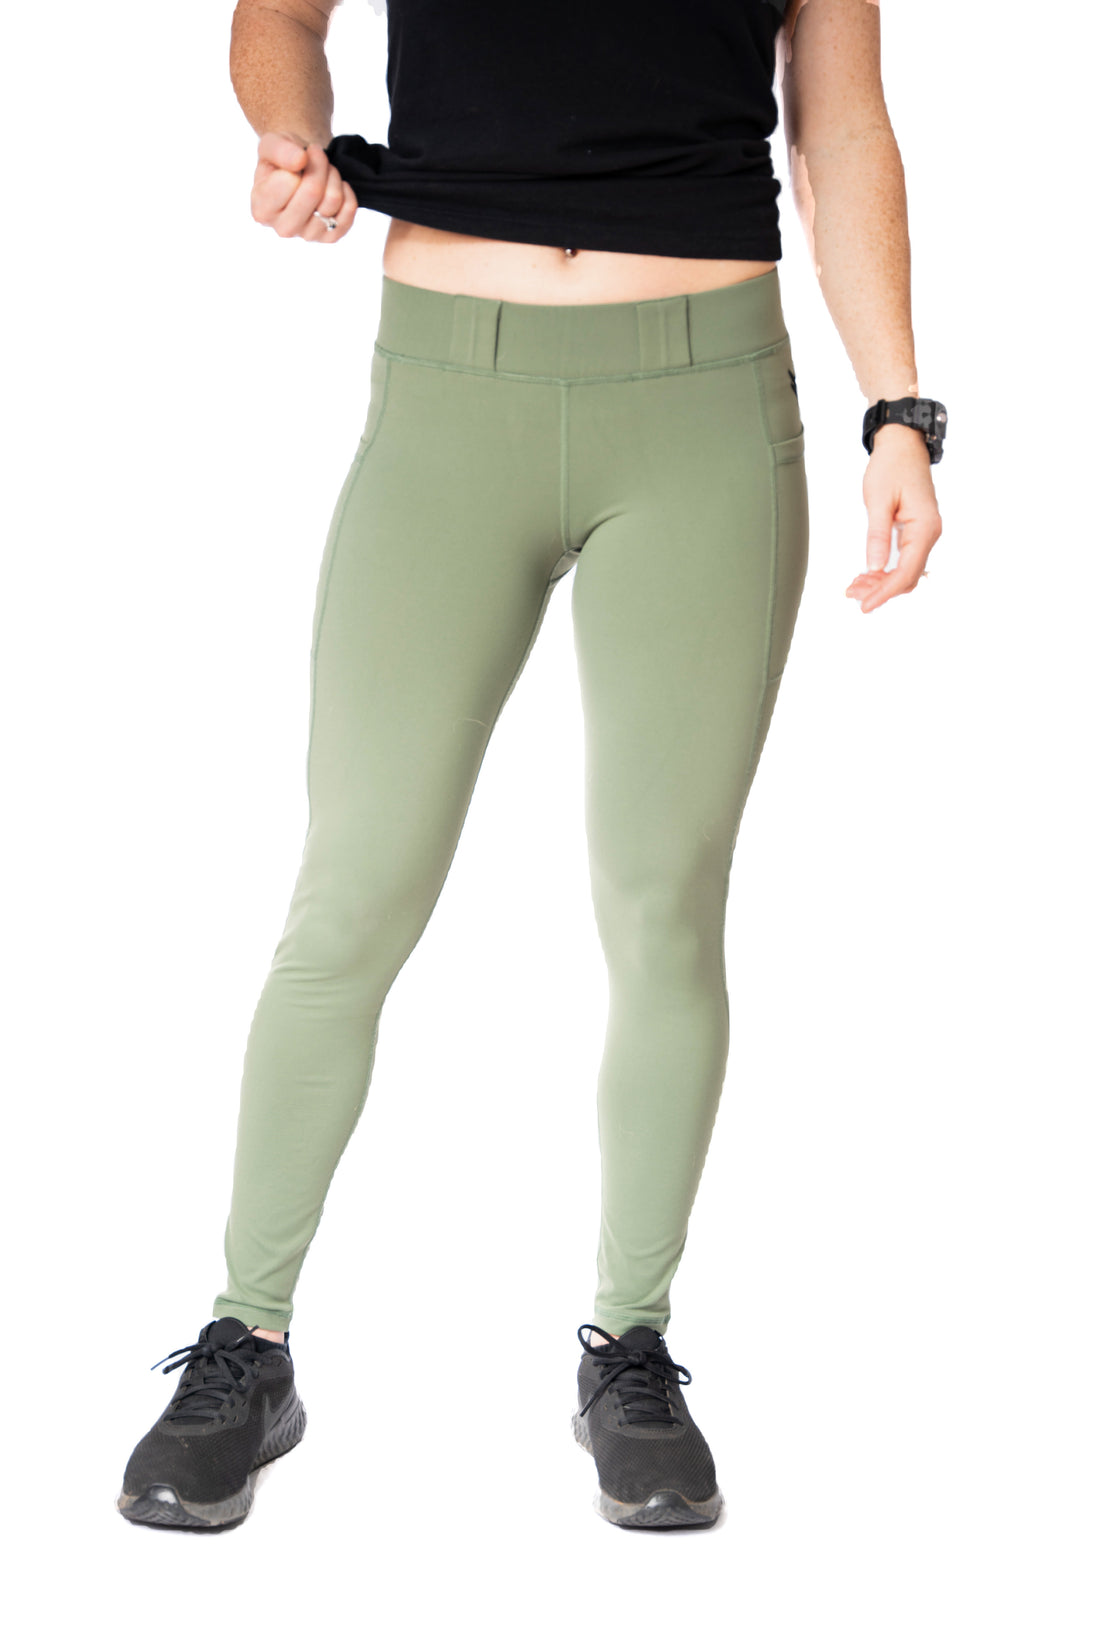 womens olive green conceal carry leggings with beltloops